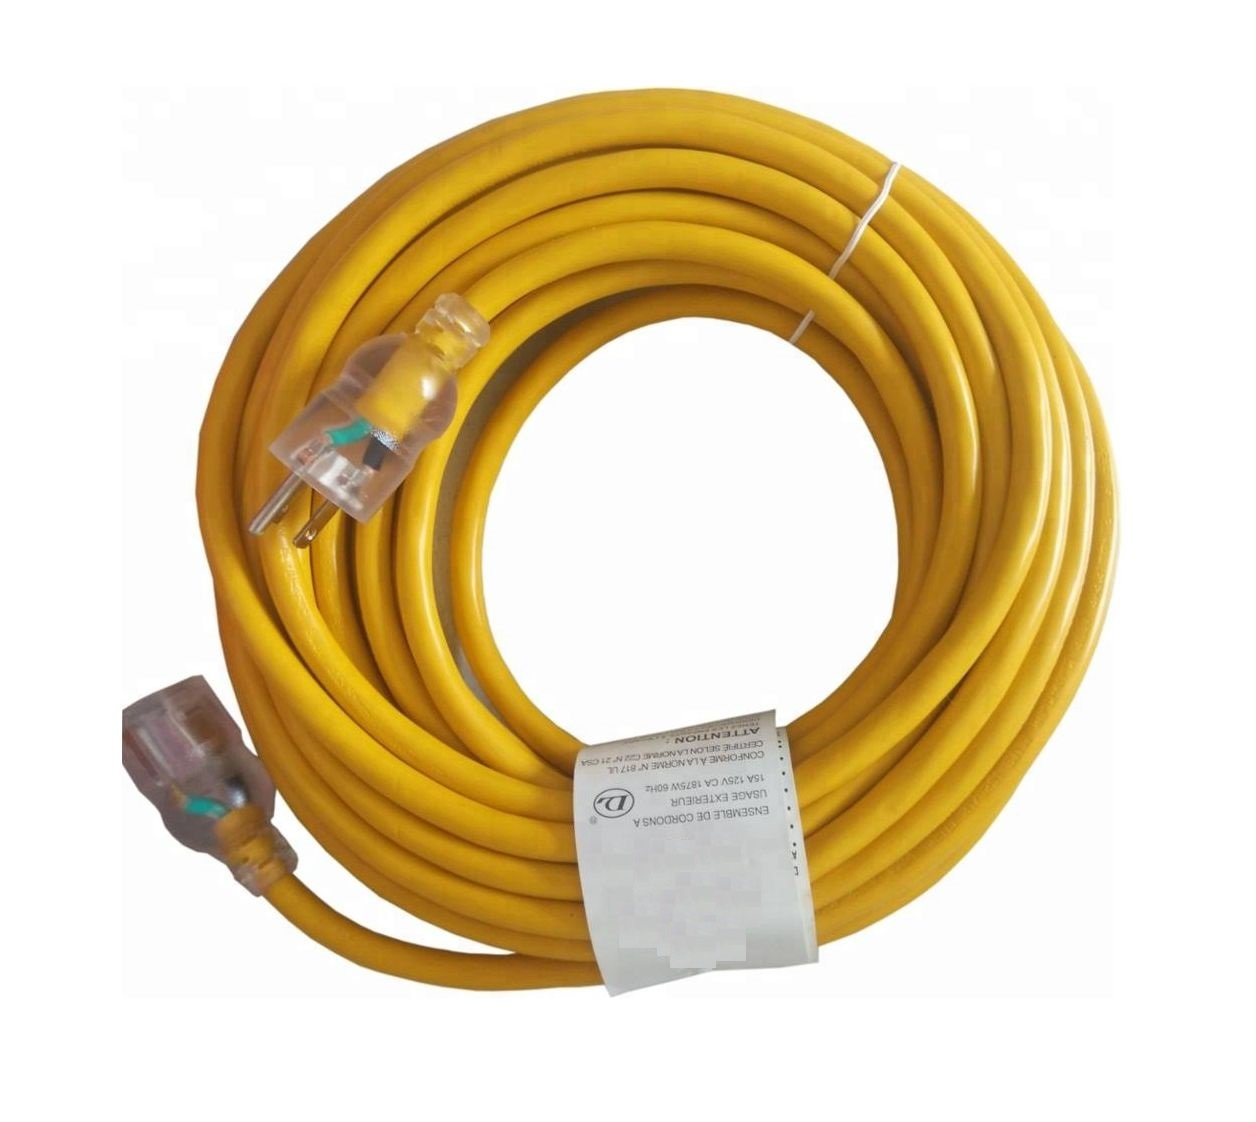 Wholesale Electrical Cord Supplier in the US